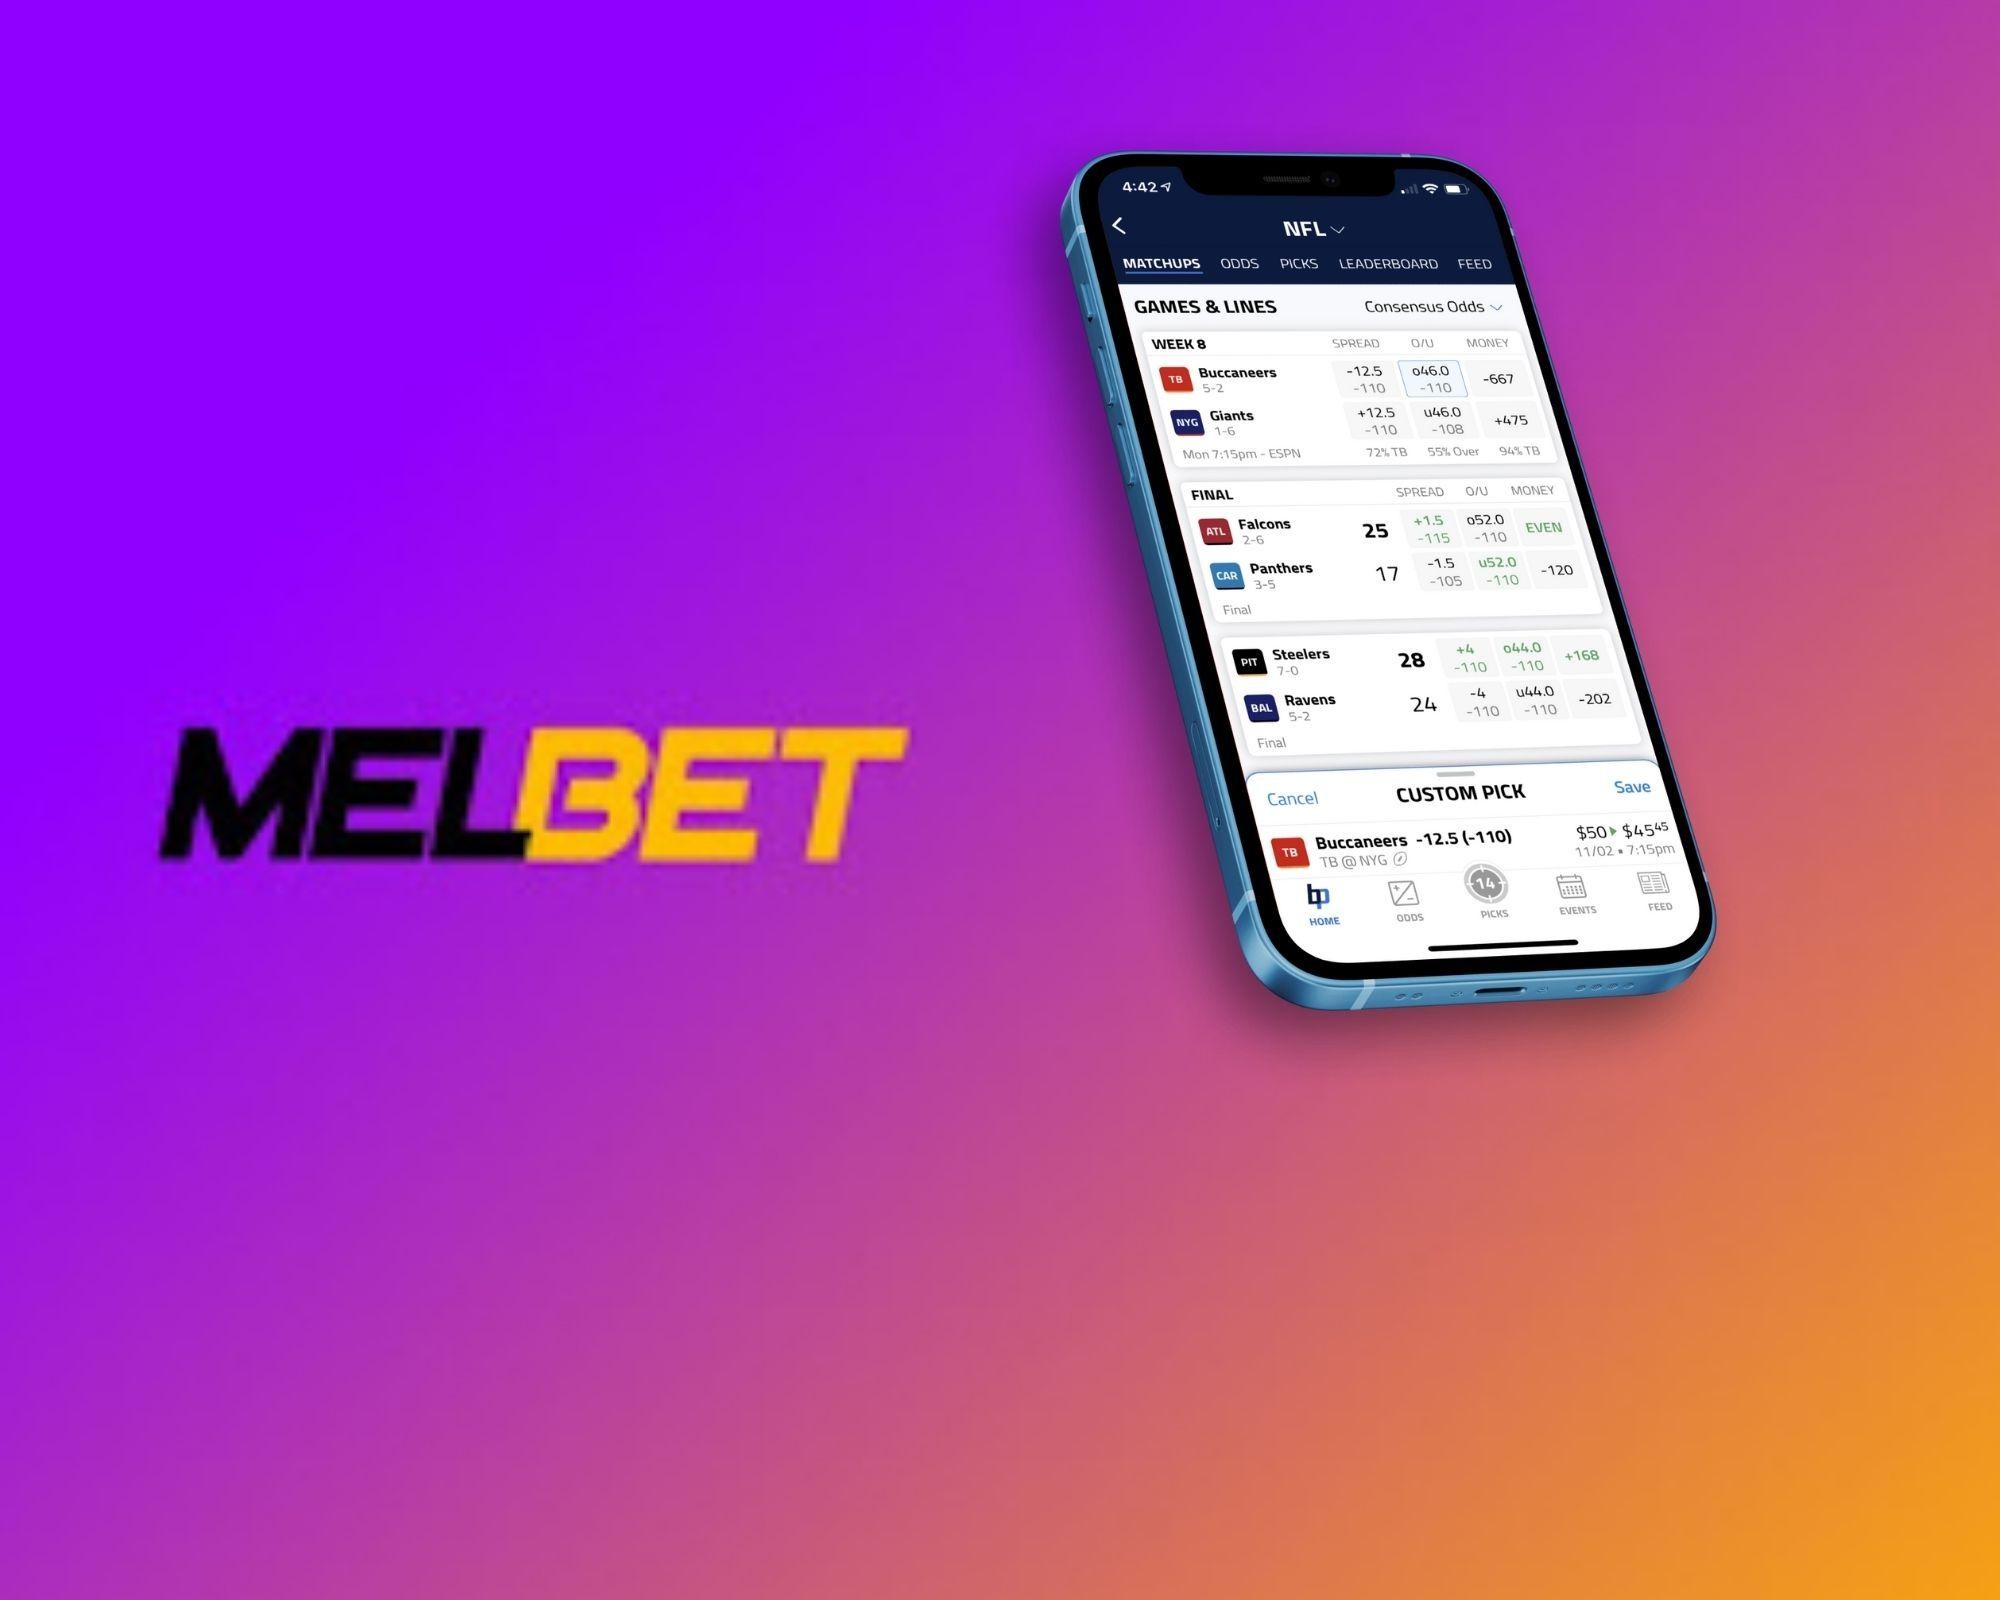 Sport Betting Features for Melbet APK